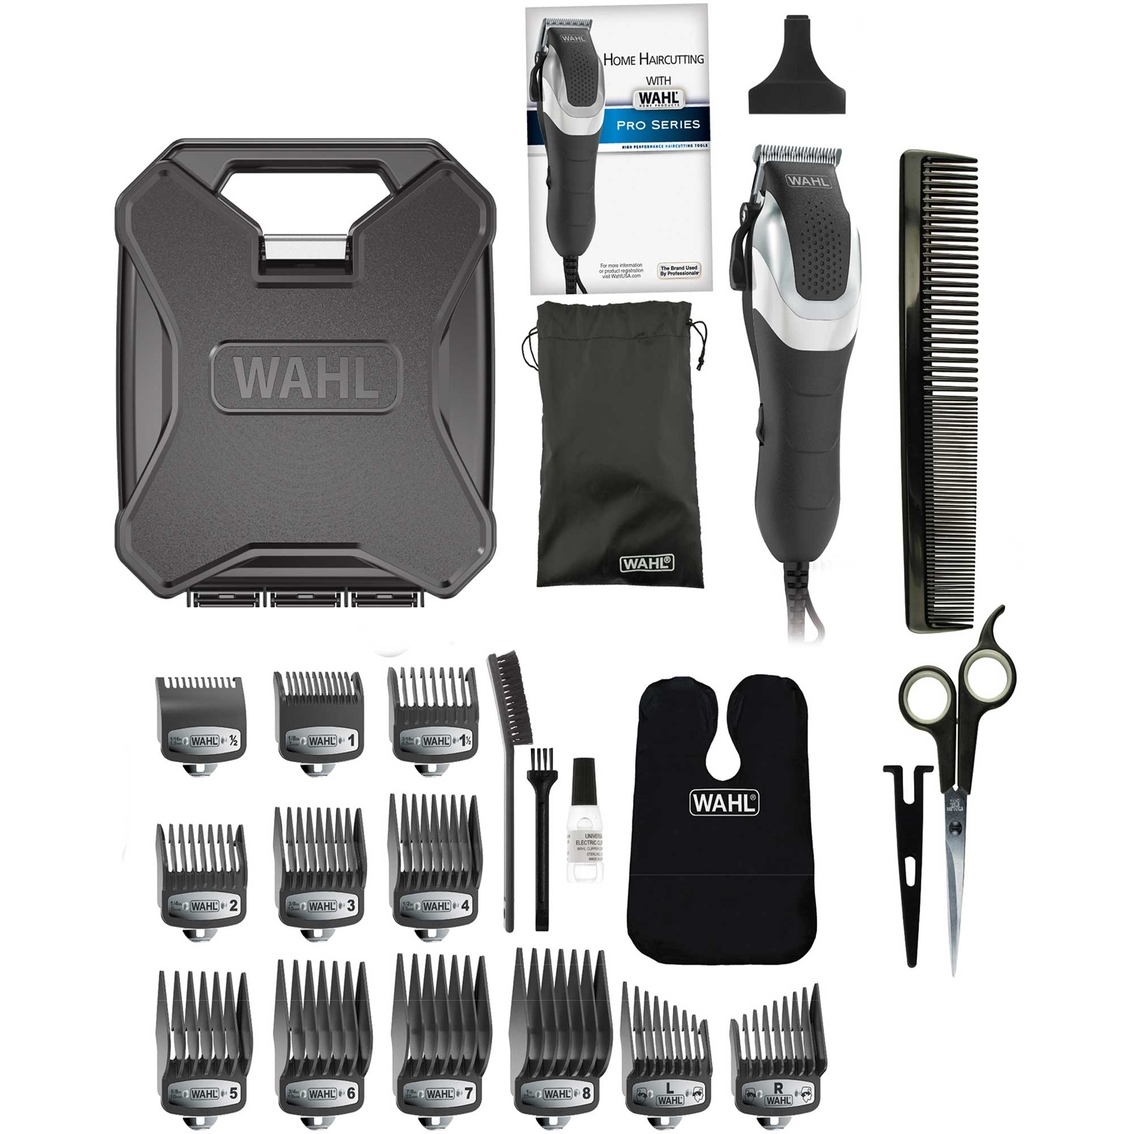 Wahl Pro Series Elite Edition Clipper - Image 2 of 2